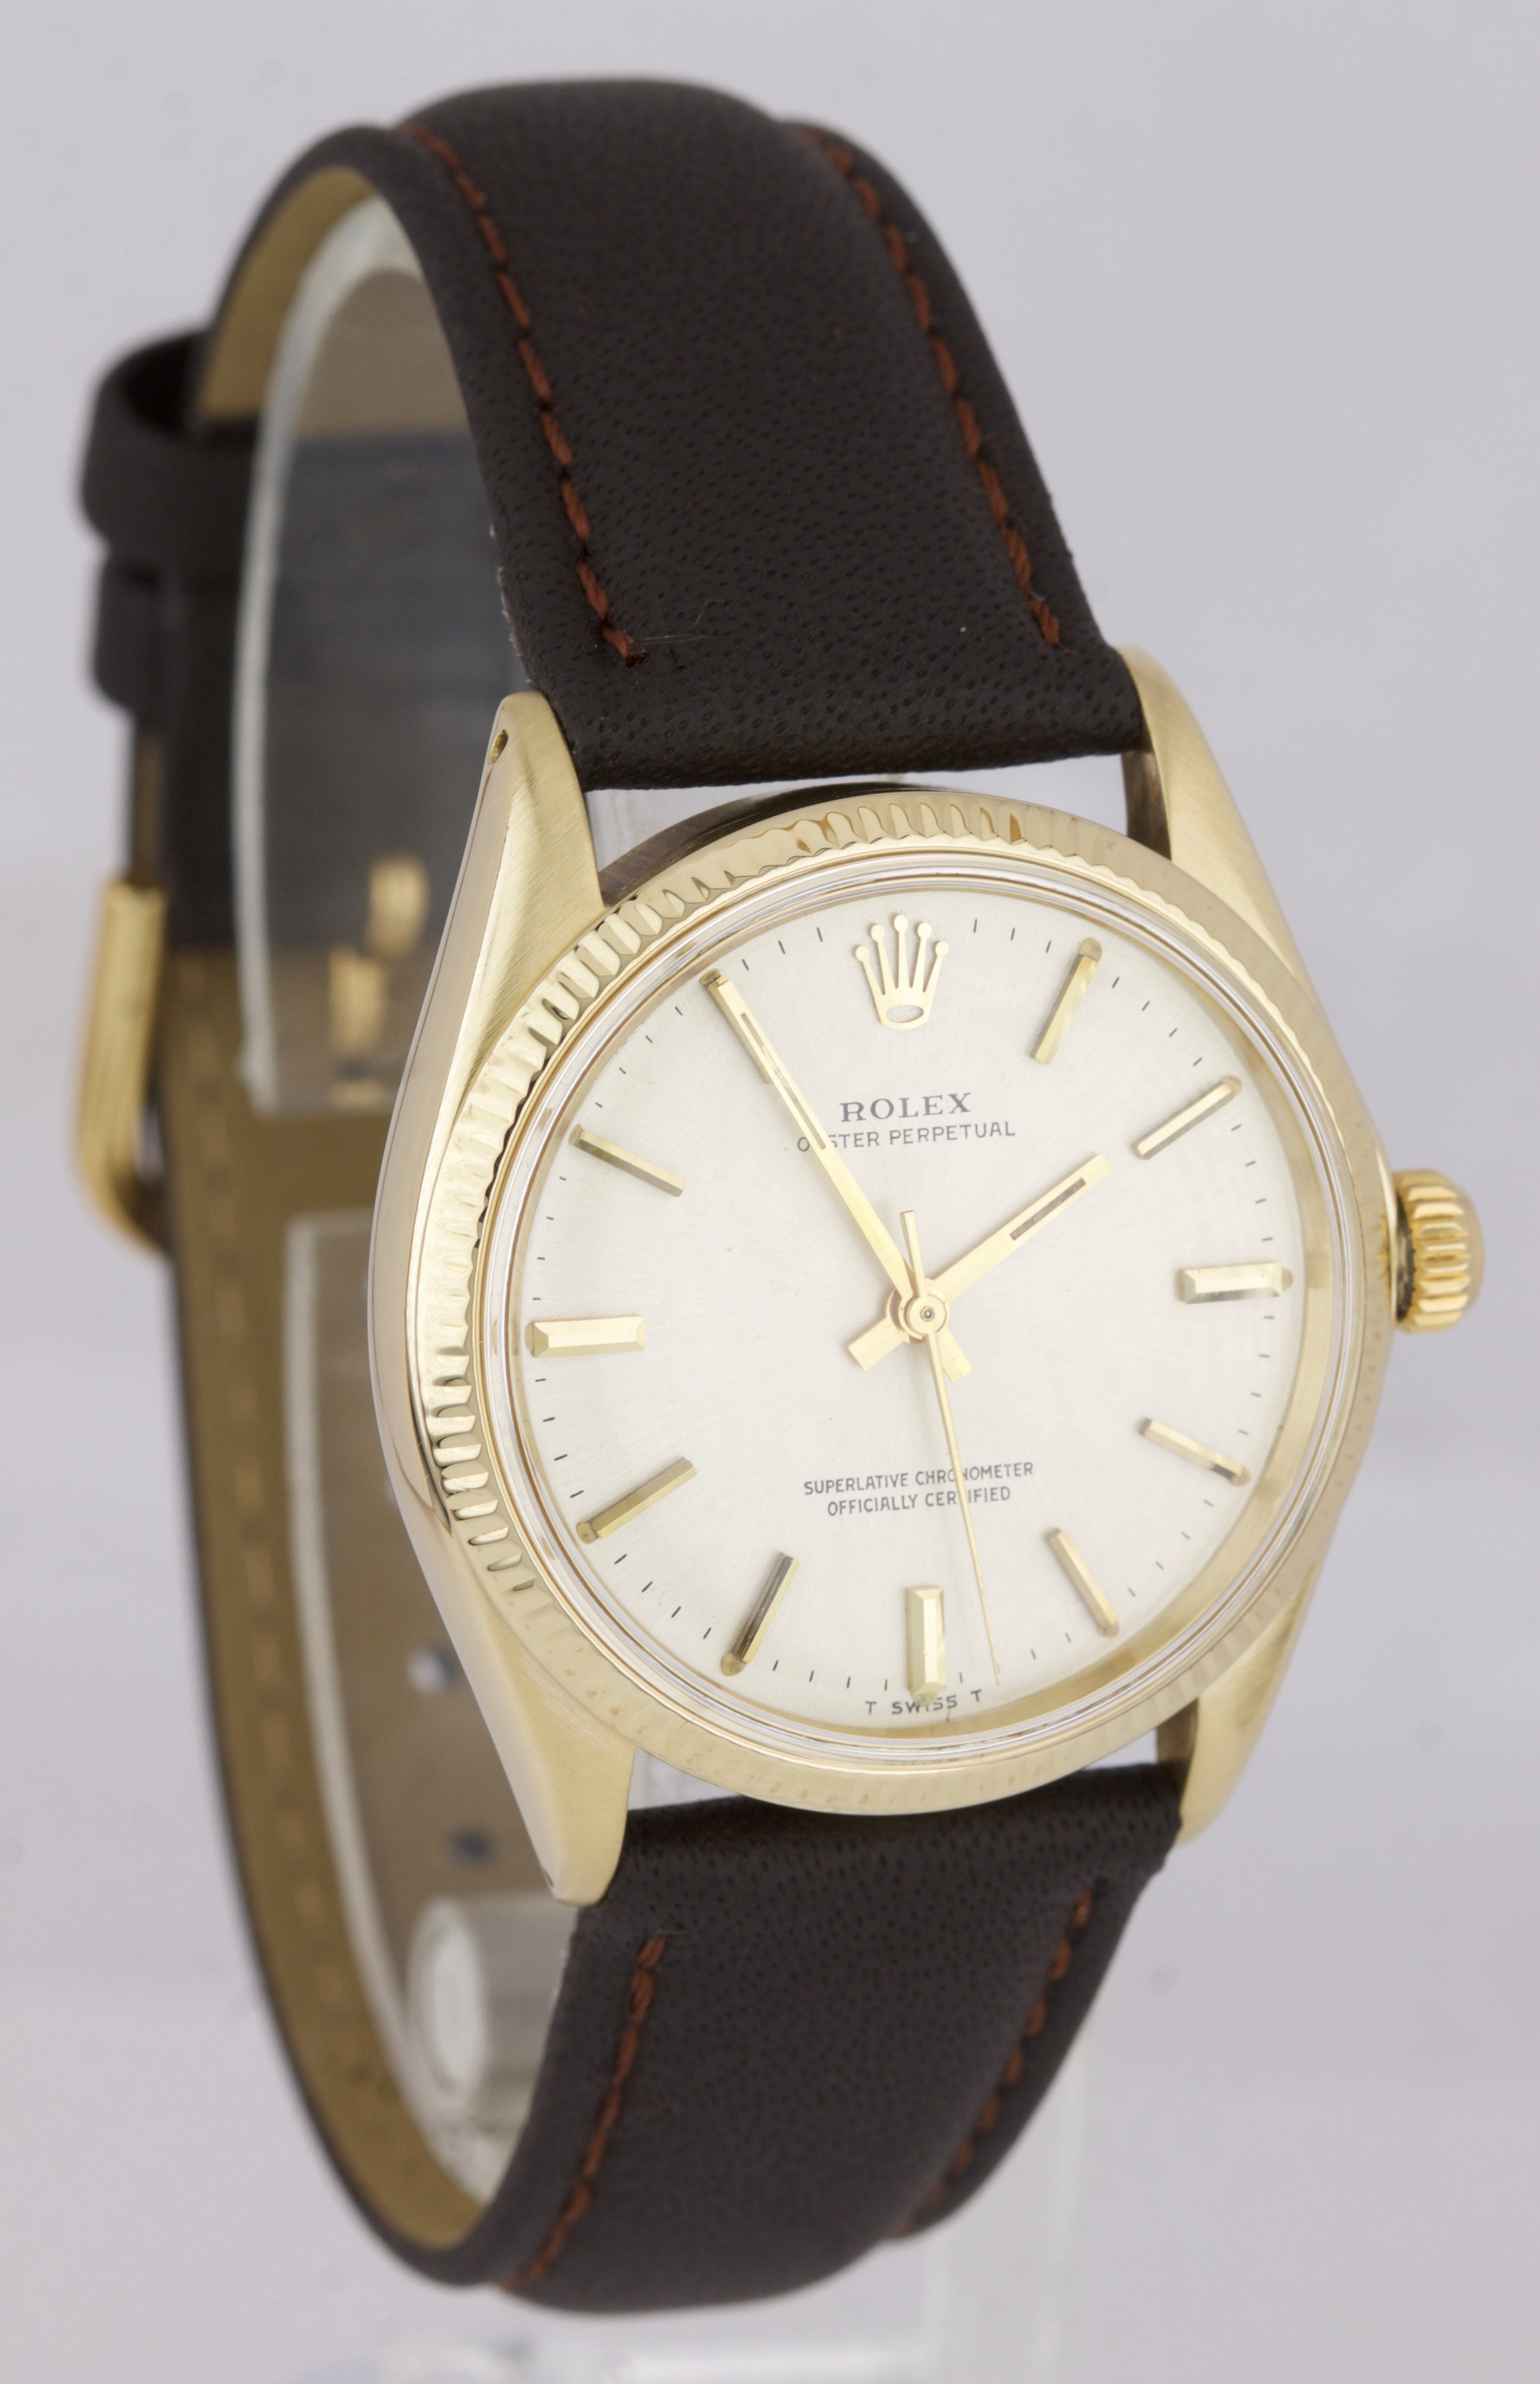 Vintage 1969 Rolex Oyster Perpetual Champagne 18K Yellow Gold Swiss Watch 1005